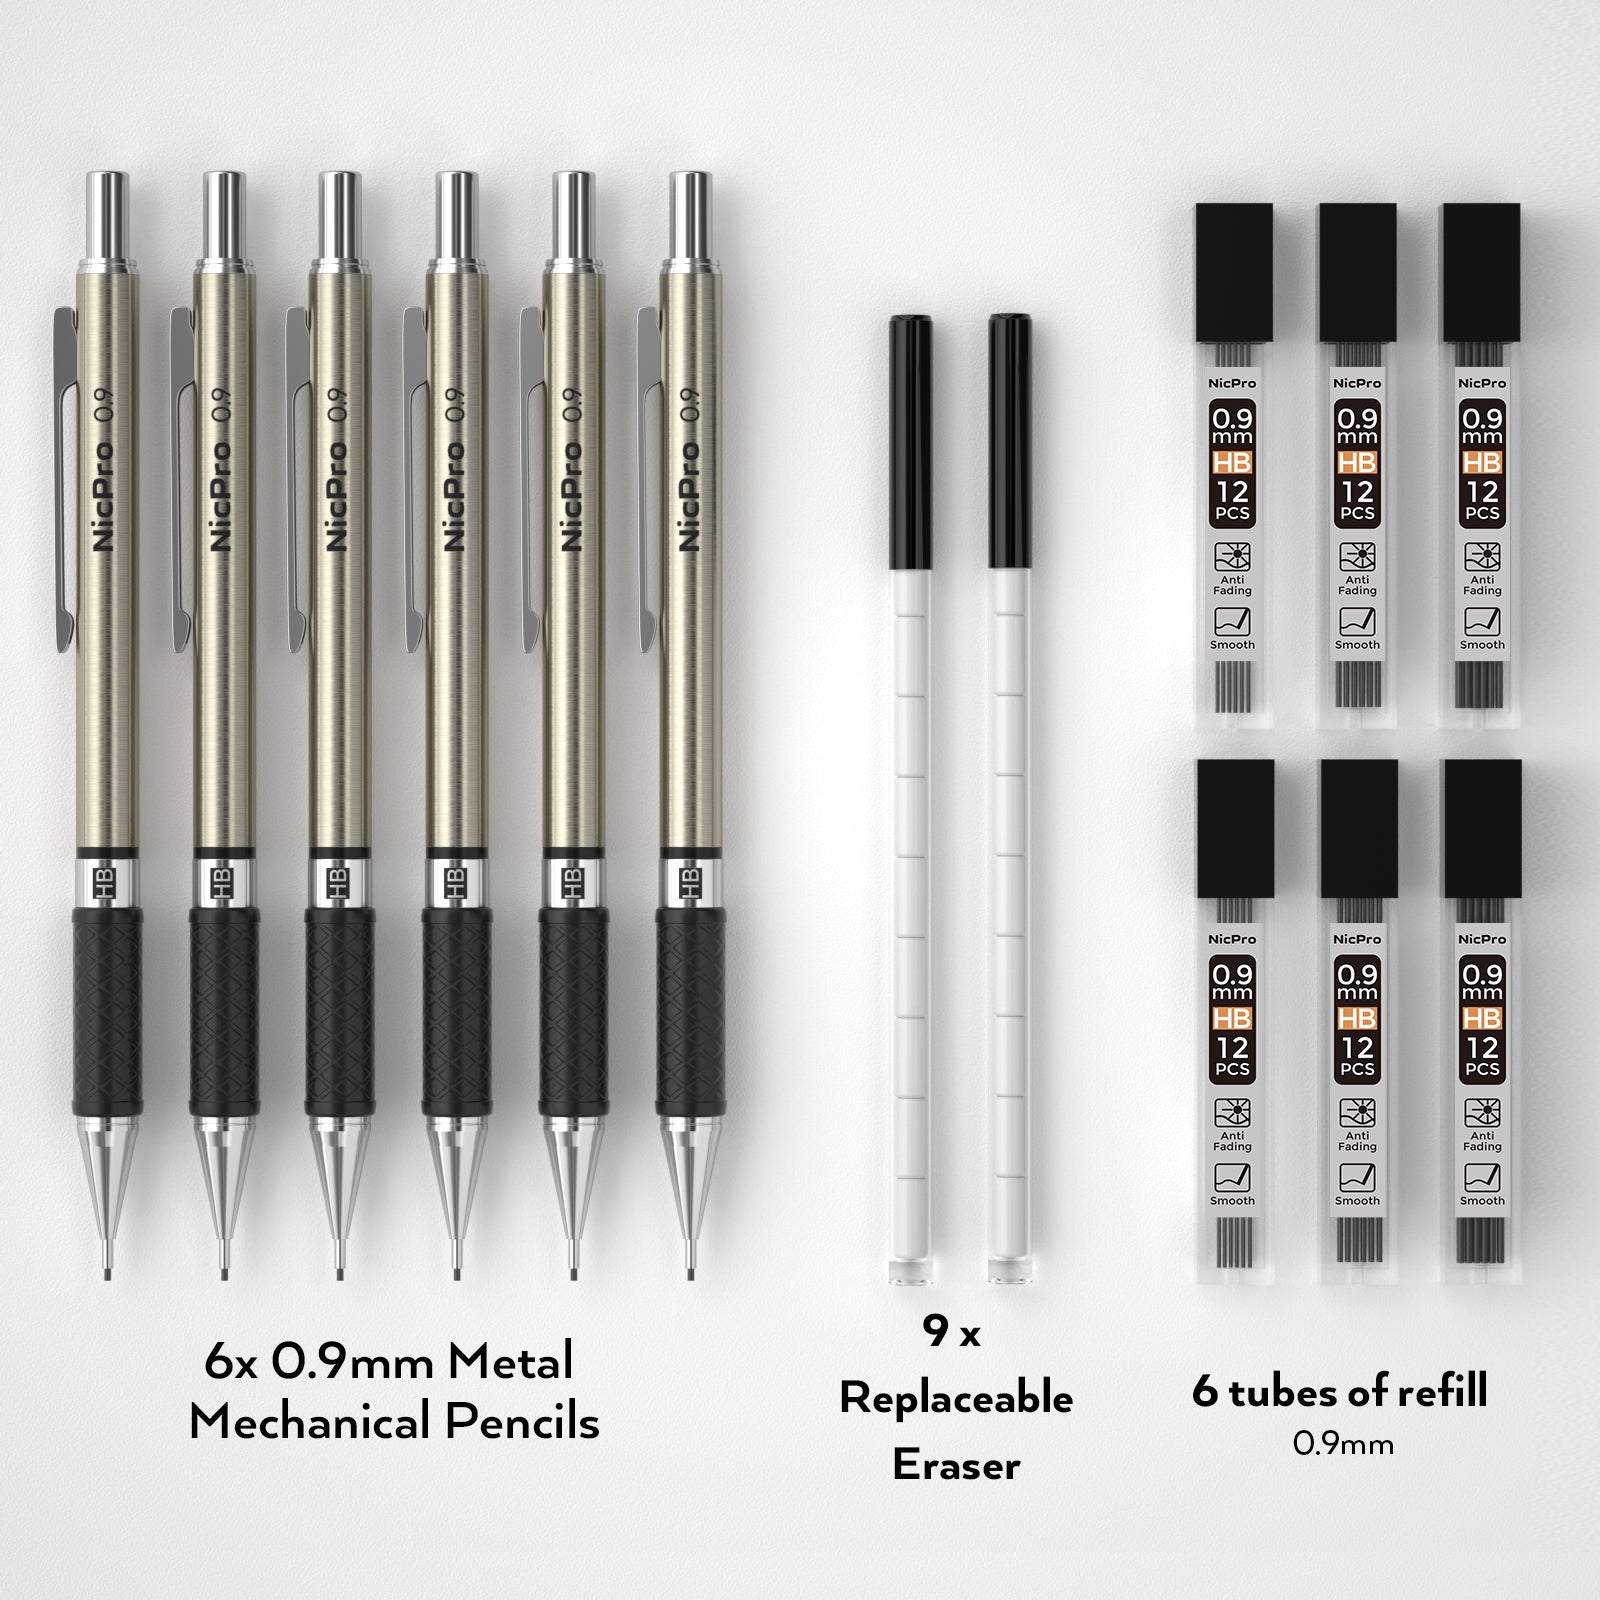 Nicpro 4PCS Metal Mechanical Pencils Set 0.7mm, Lead Drafting Pencil 0.7 mm  with 8 Tube HB #2 Lead Refill, 3PCS 4B Eraser, 9 Eraser Refill for Artist